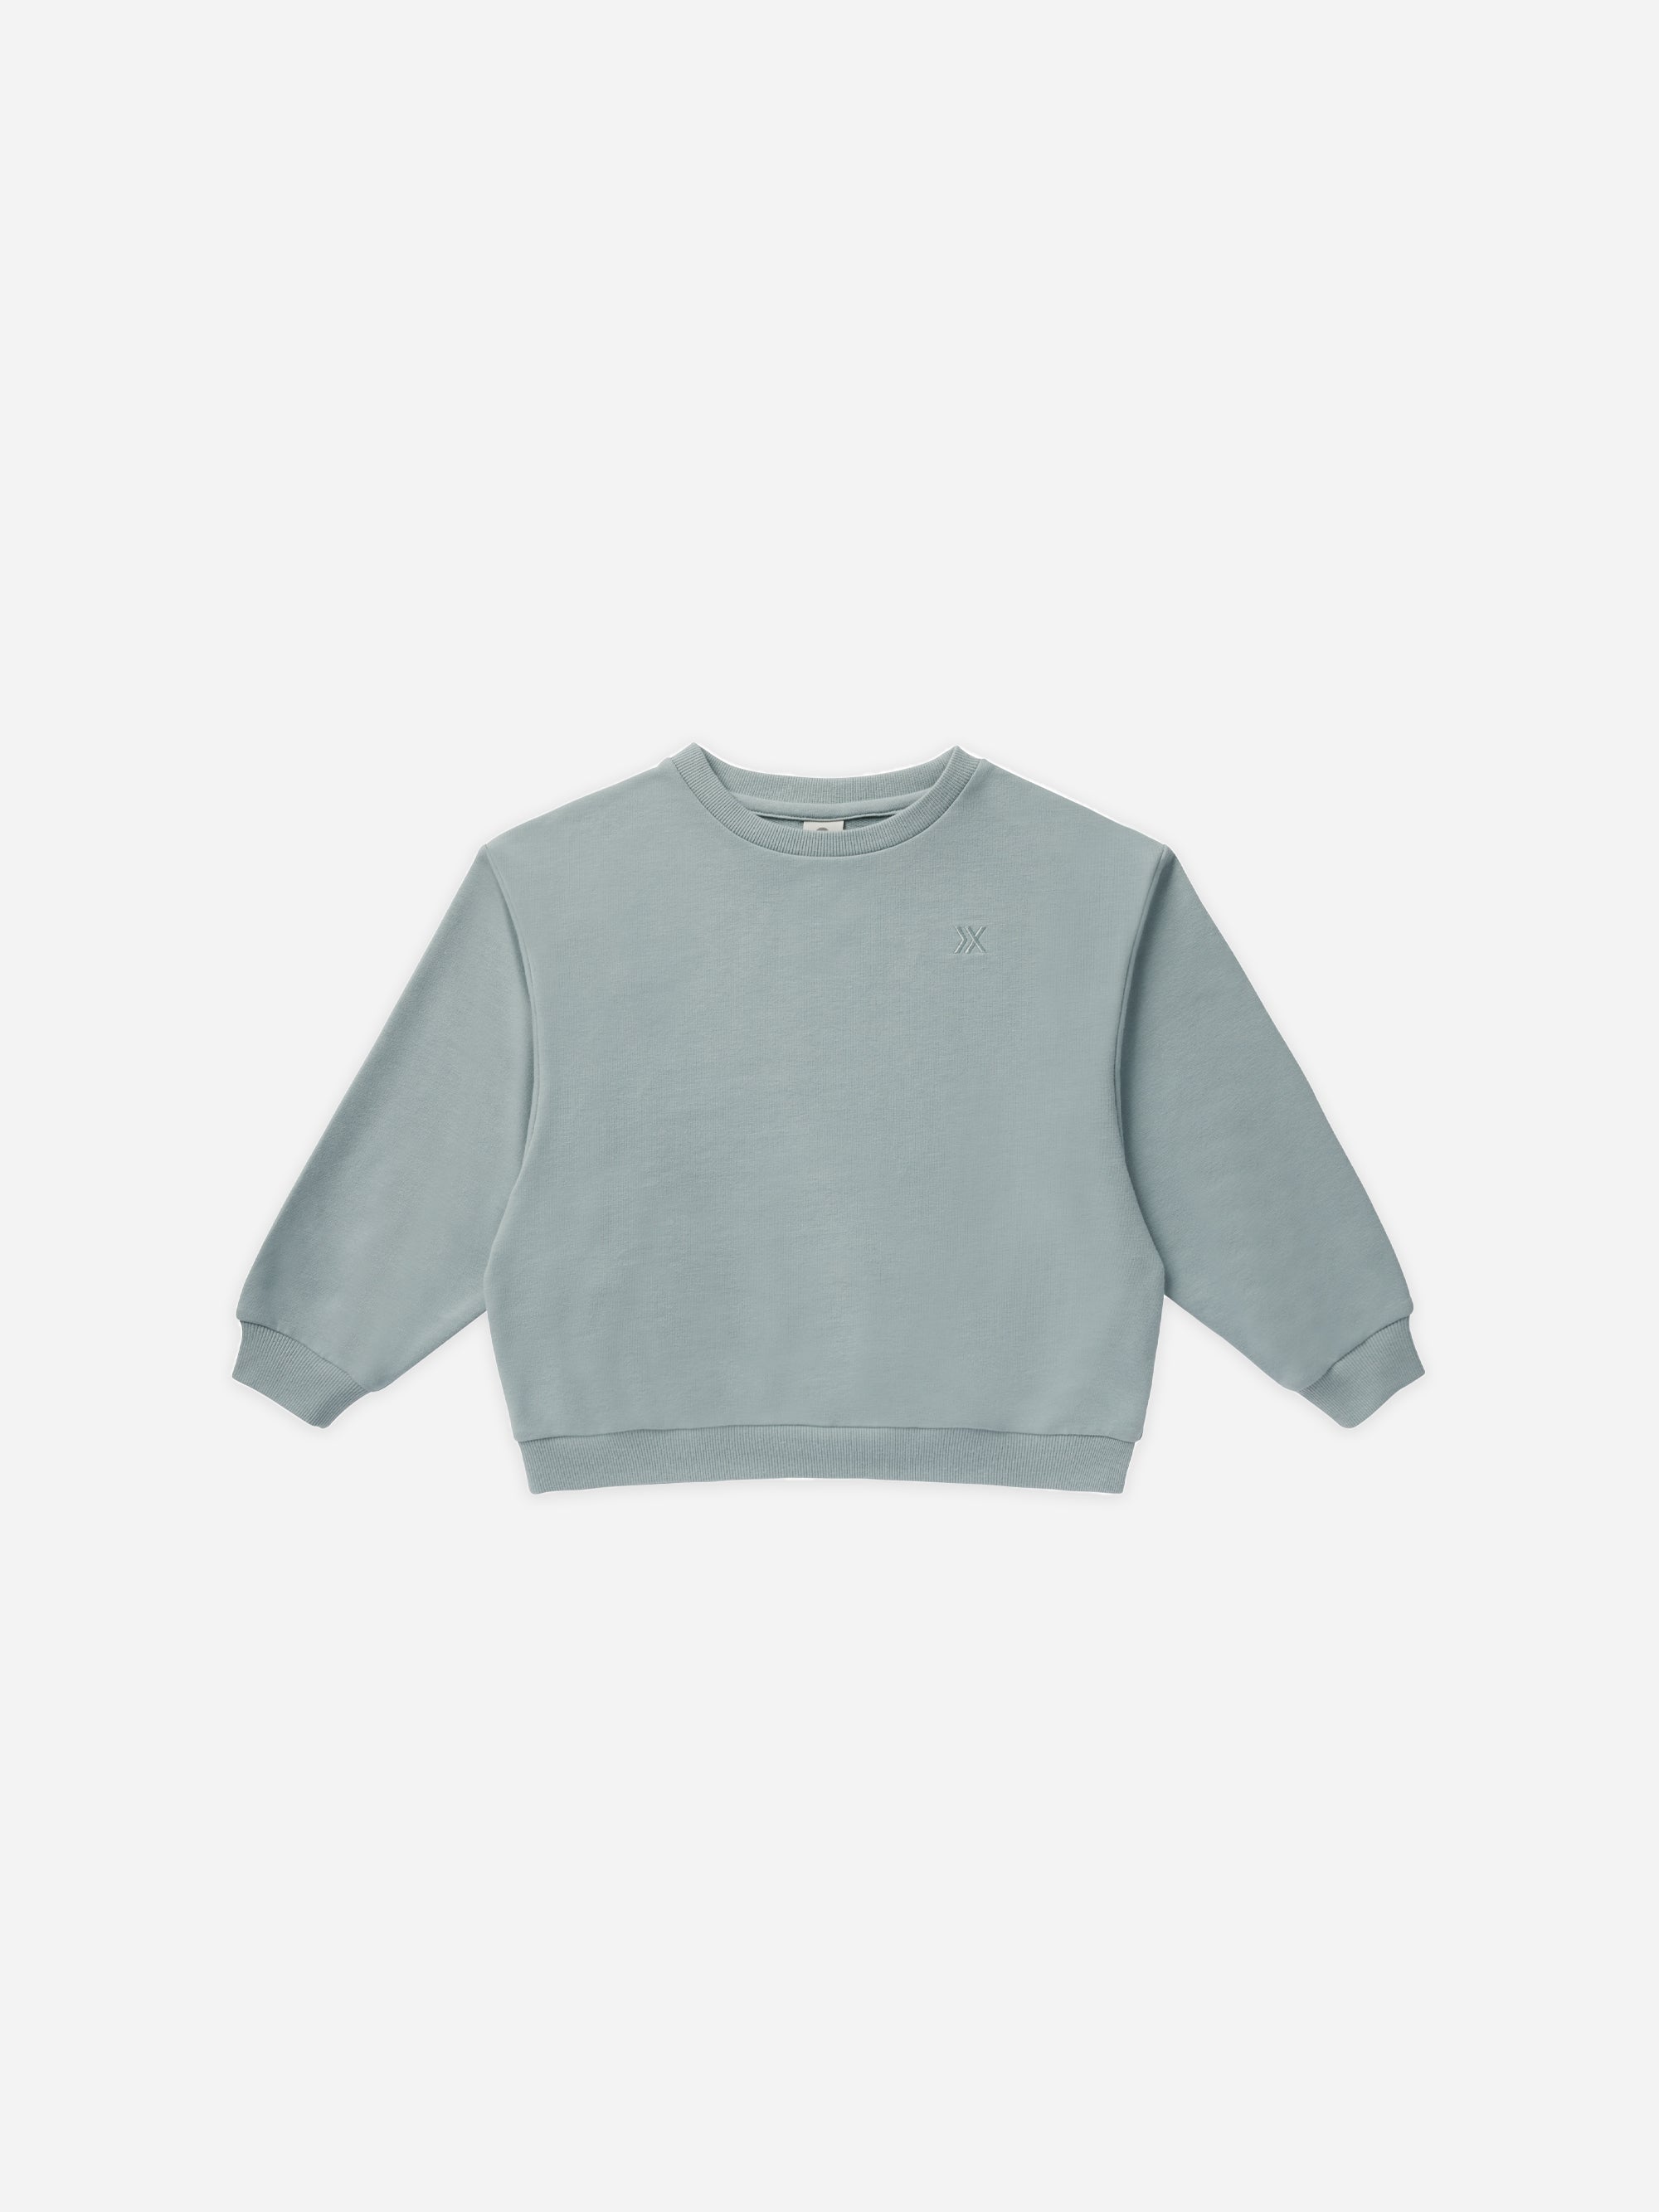 Relaxed Sweatshirt || Blue - Rylee + Cru | Kids Clothes | Trendy Baby Clothes | Modern Infant Outfits |